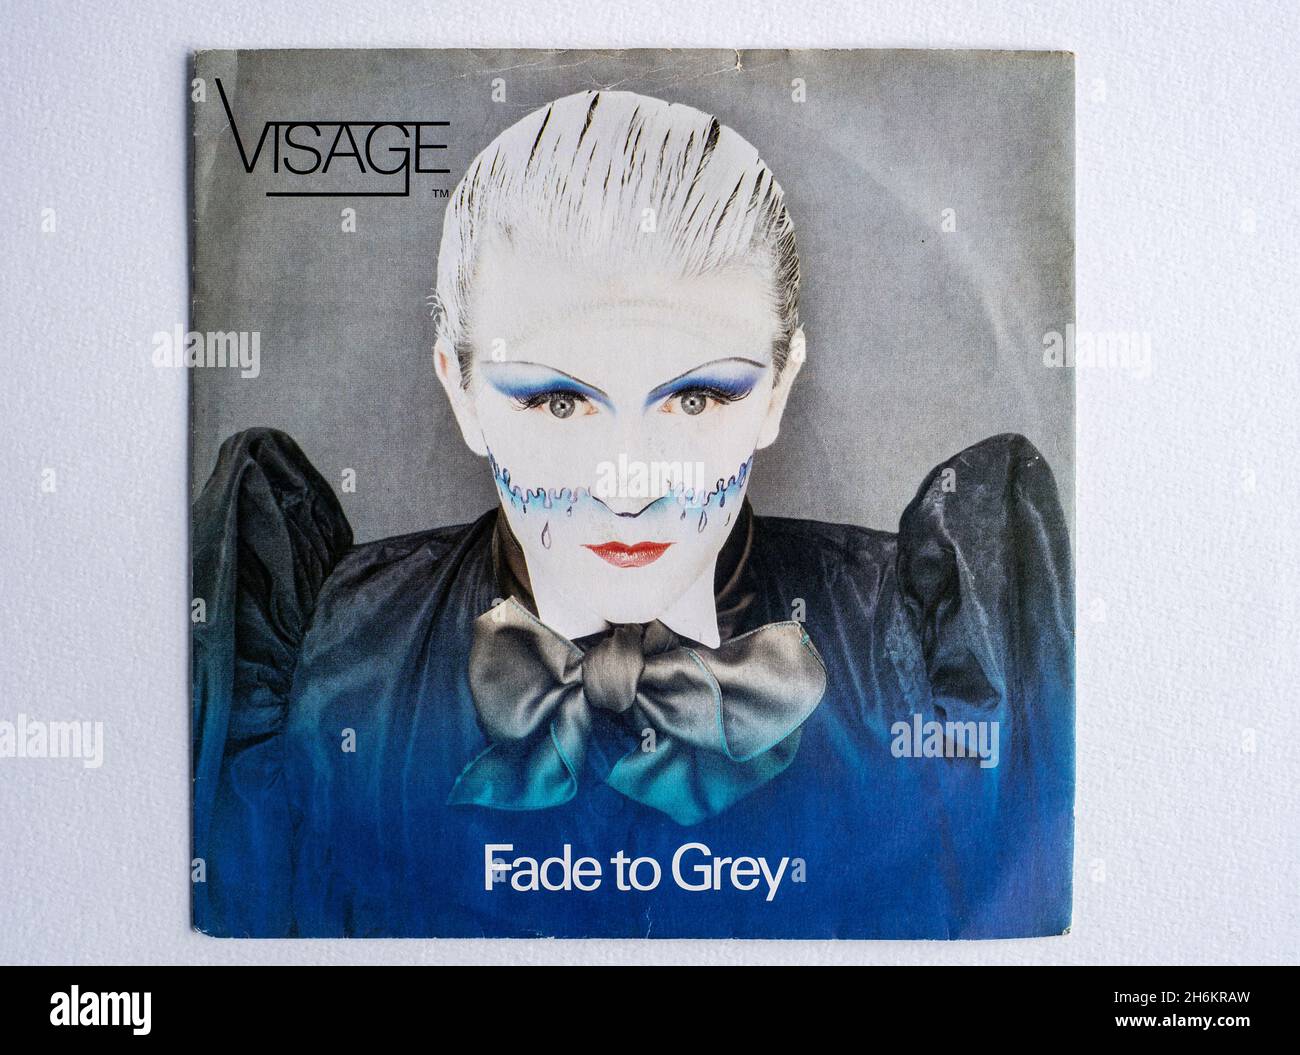 Picture cover of the seven inch vinyl version of Fade to Grey by Visage, which was released in 1980 Stock Photo